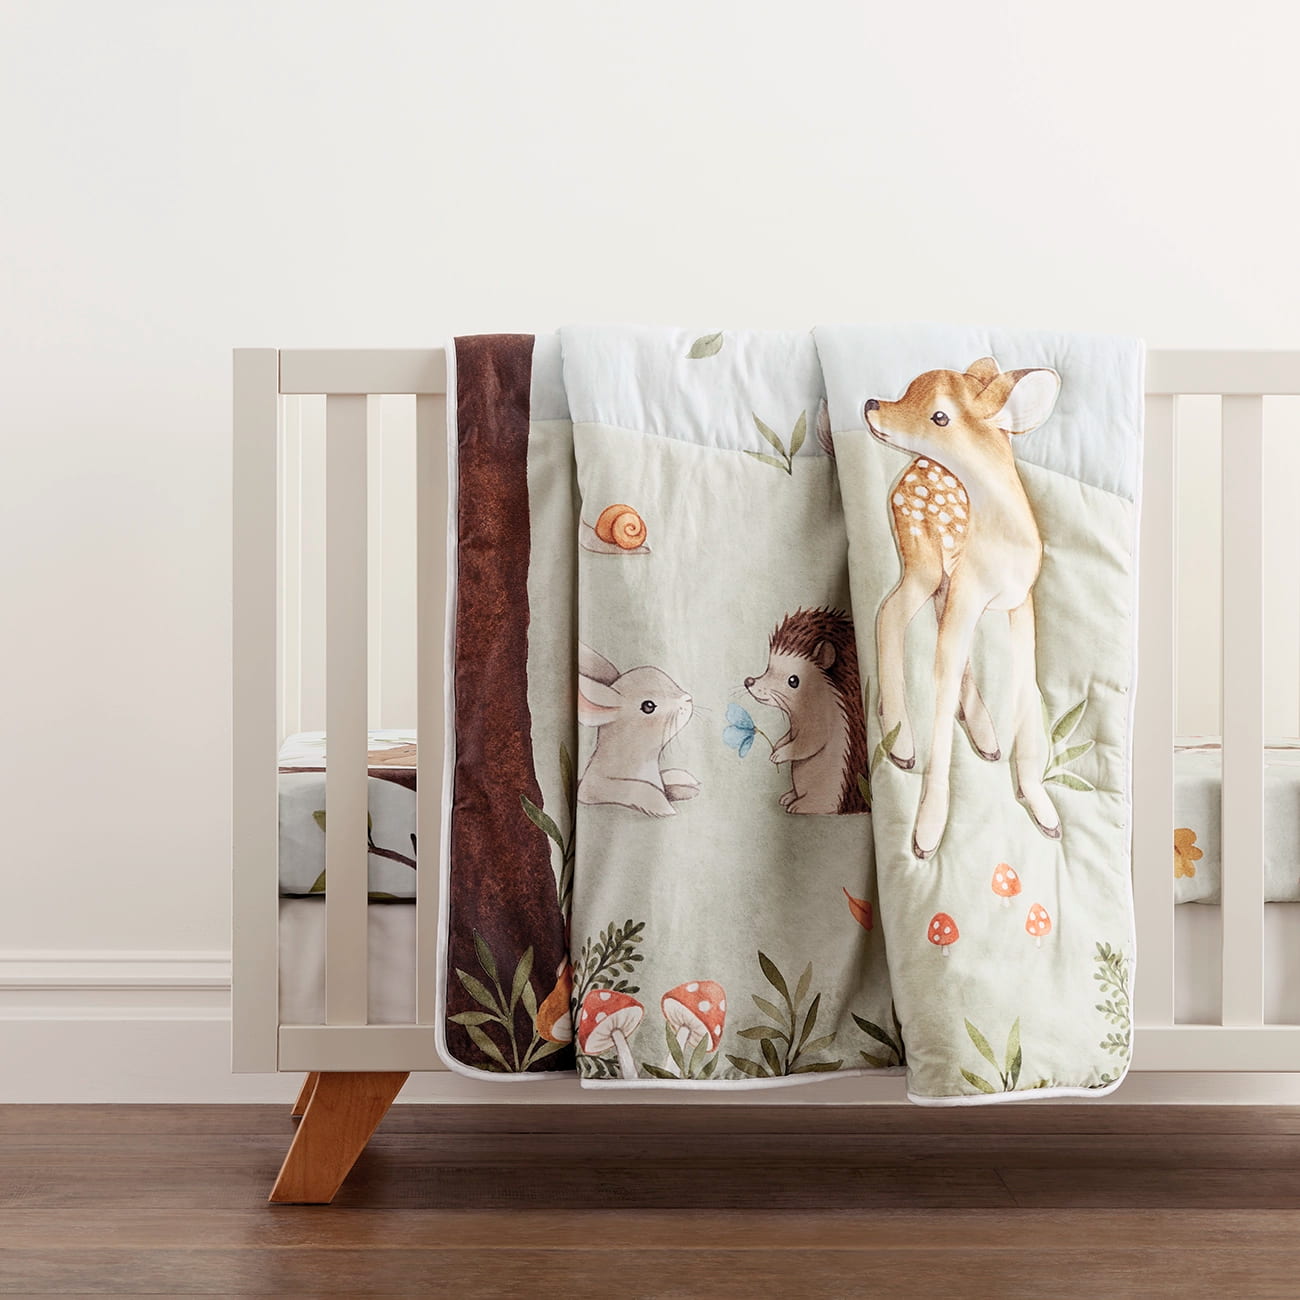 Enchanted forest toddler comforter woodland baby quilt with bear bunny bird fawn hedgehog, forest scene